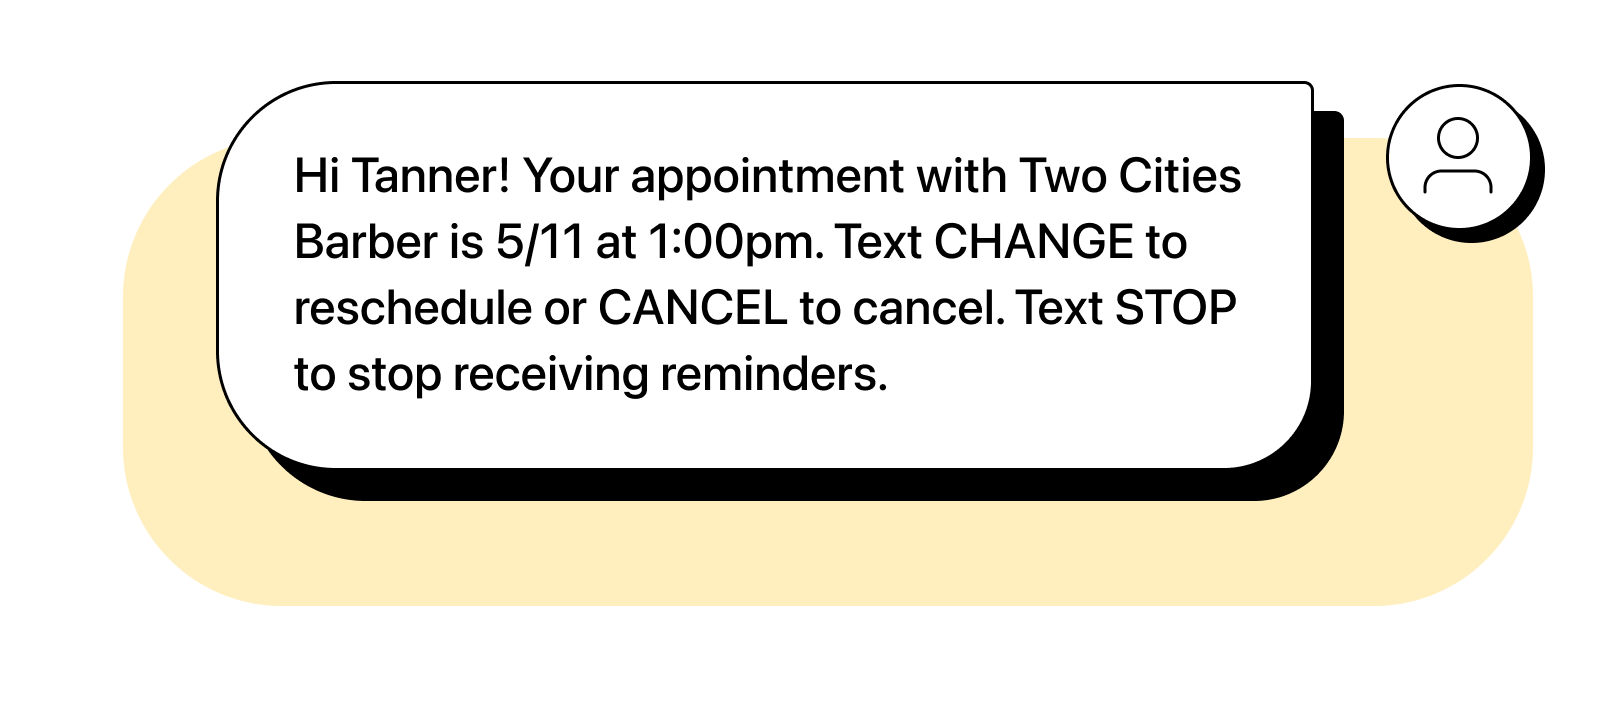 Example of an appointment confirmation text